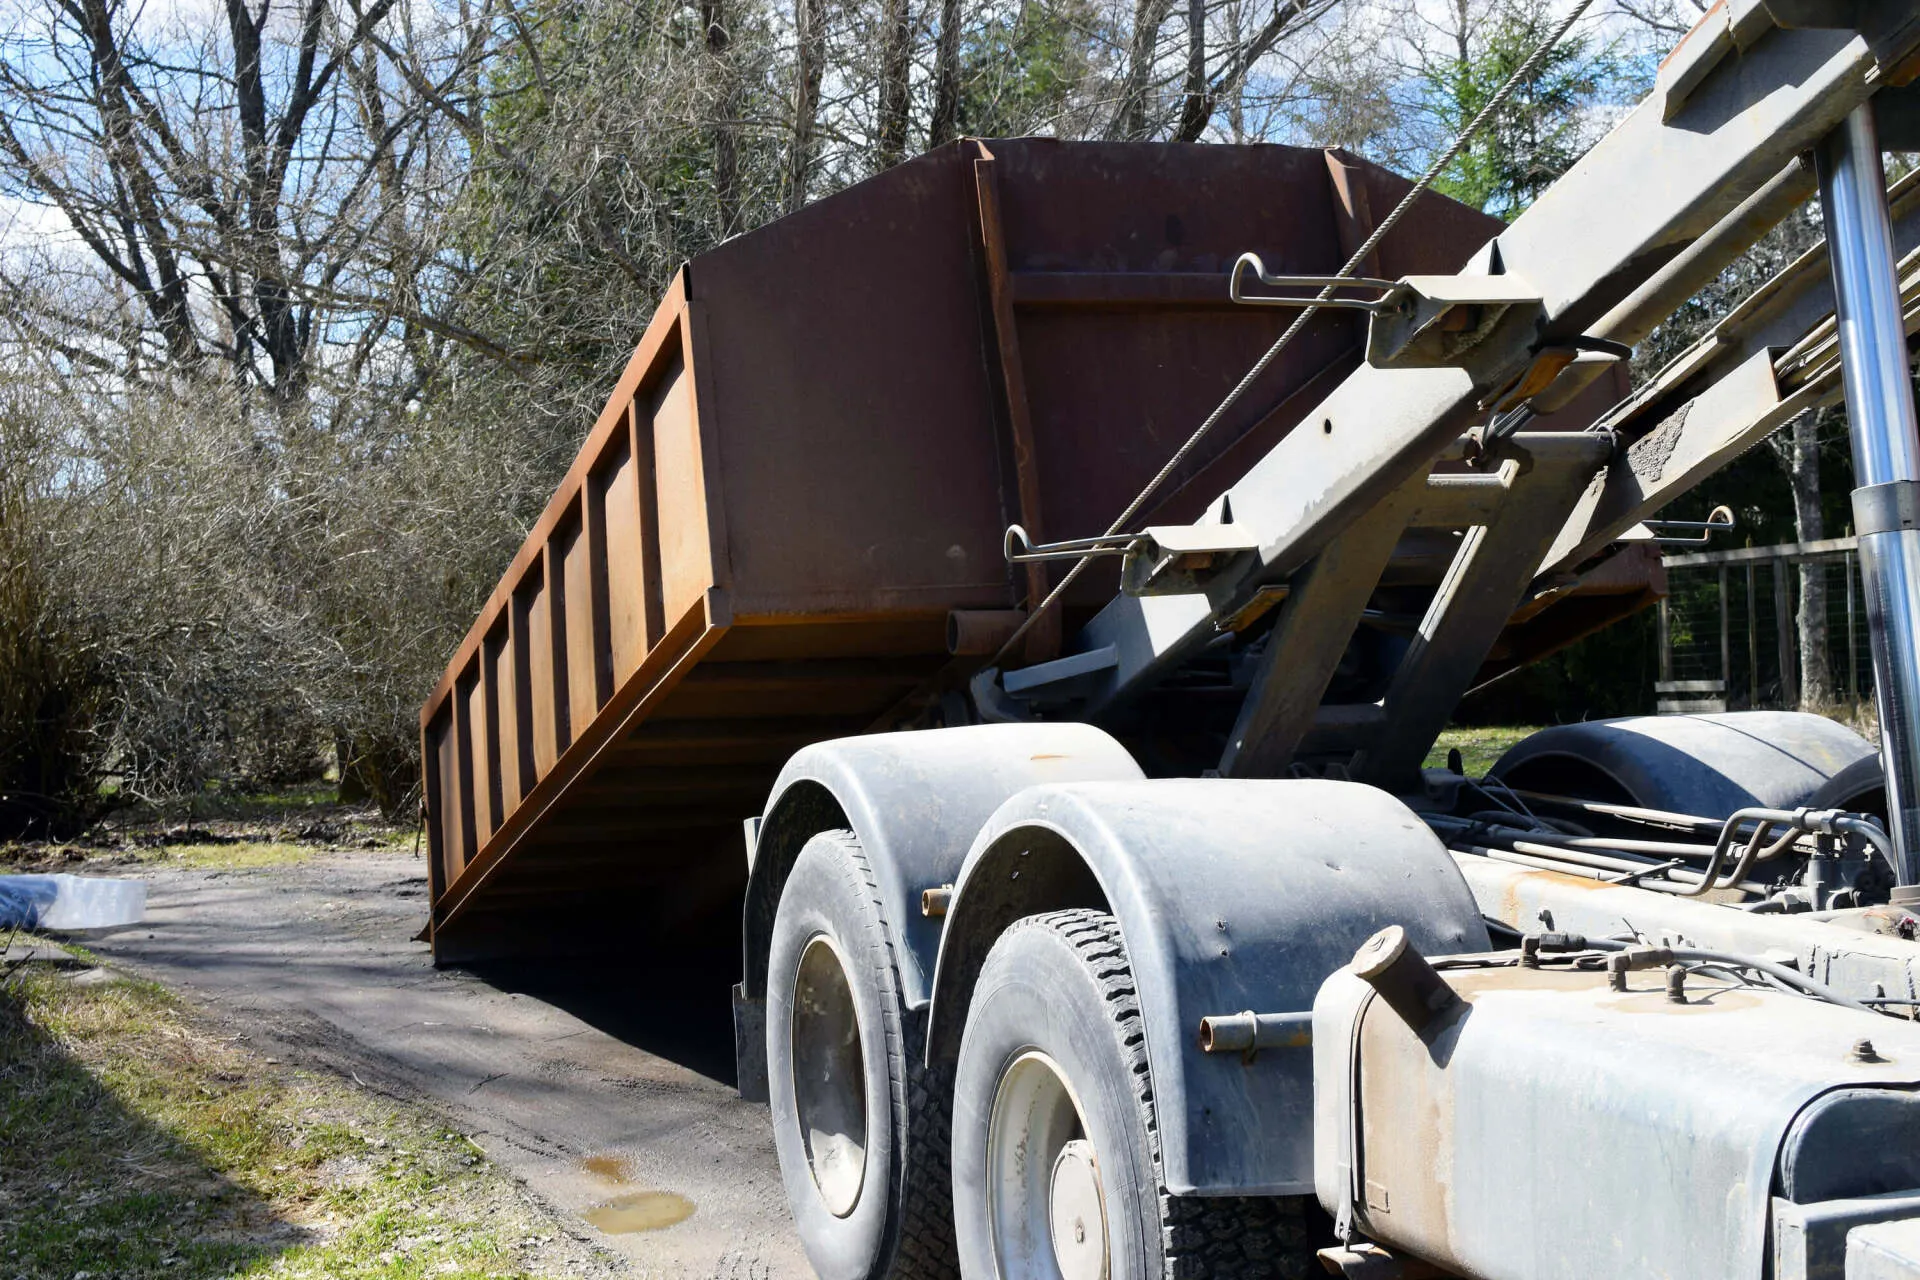 How Much Does A Dumpster Rental Cost? dumpster service